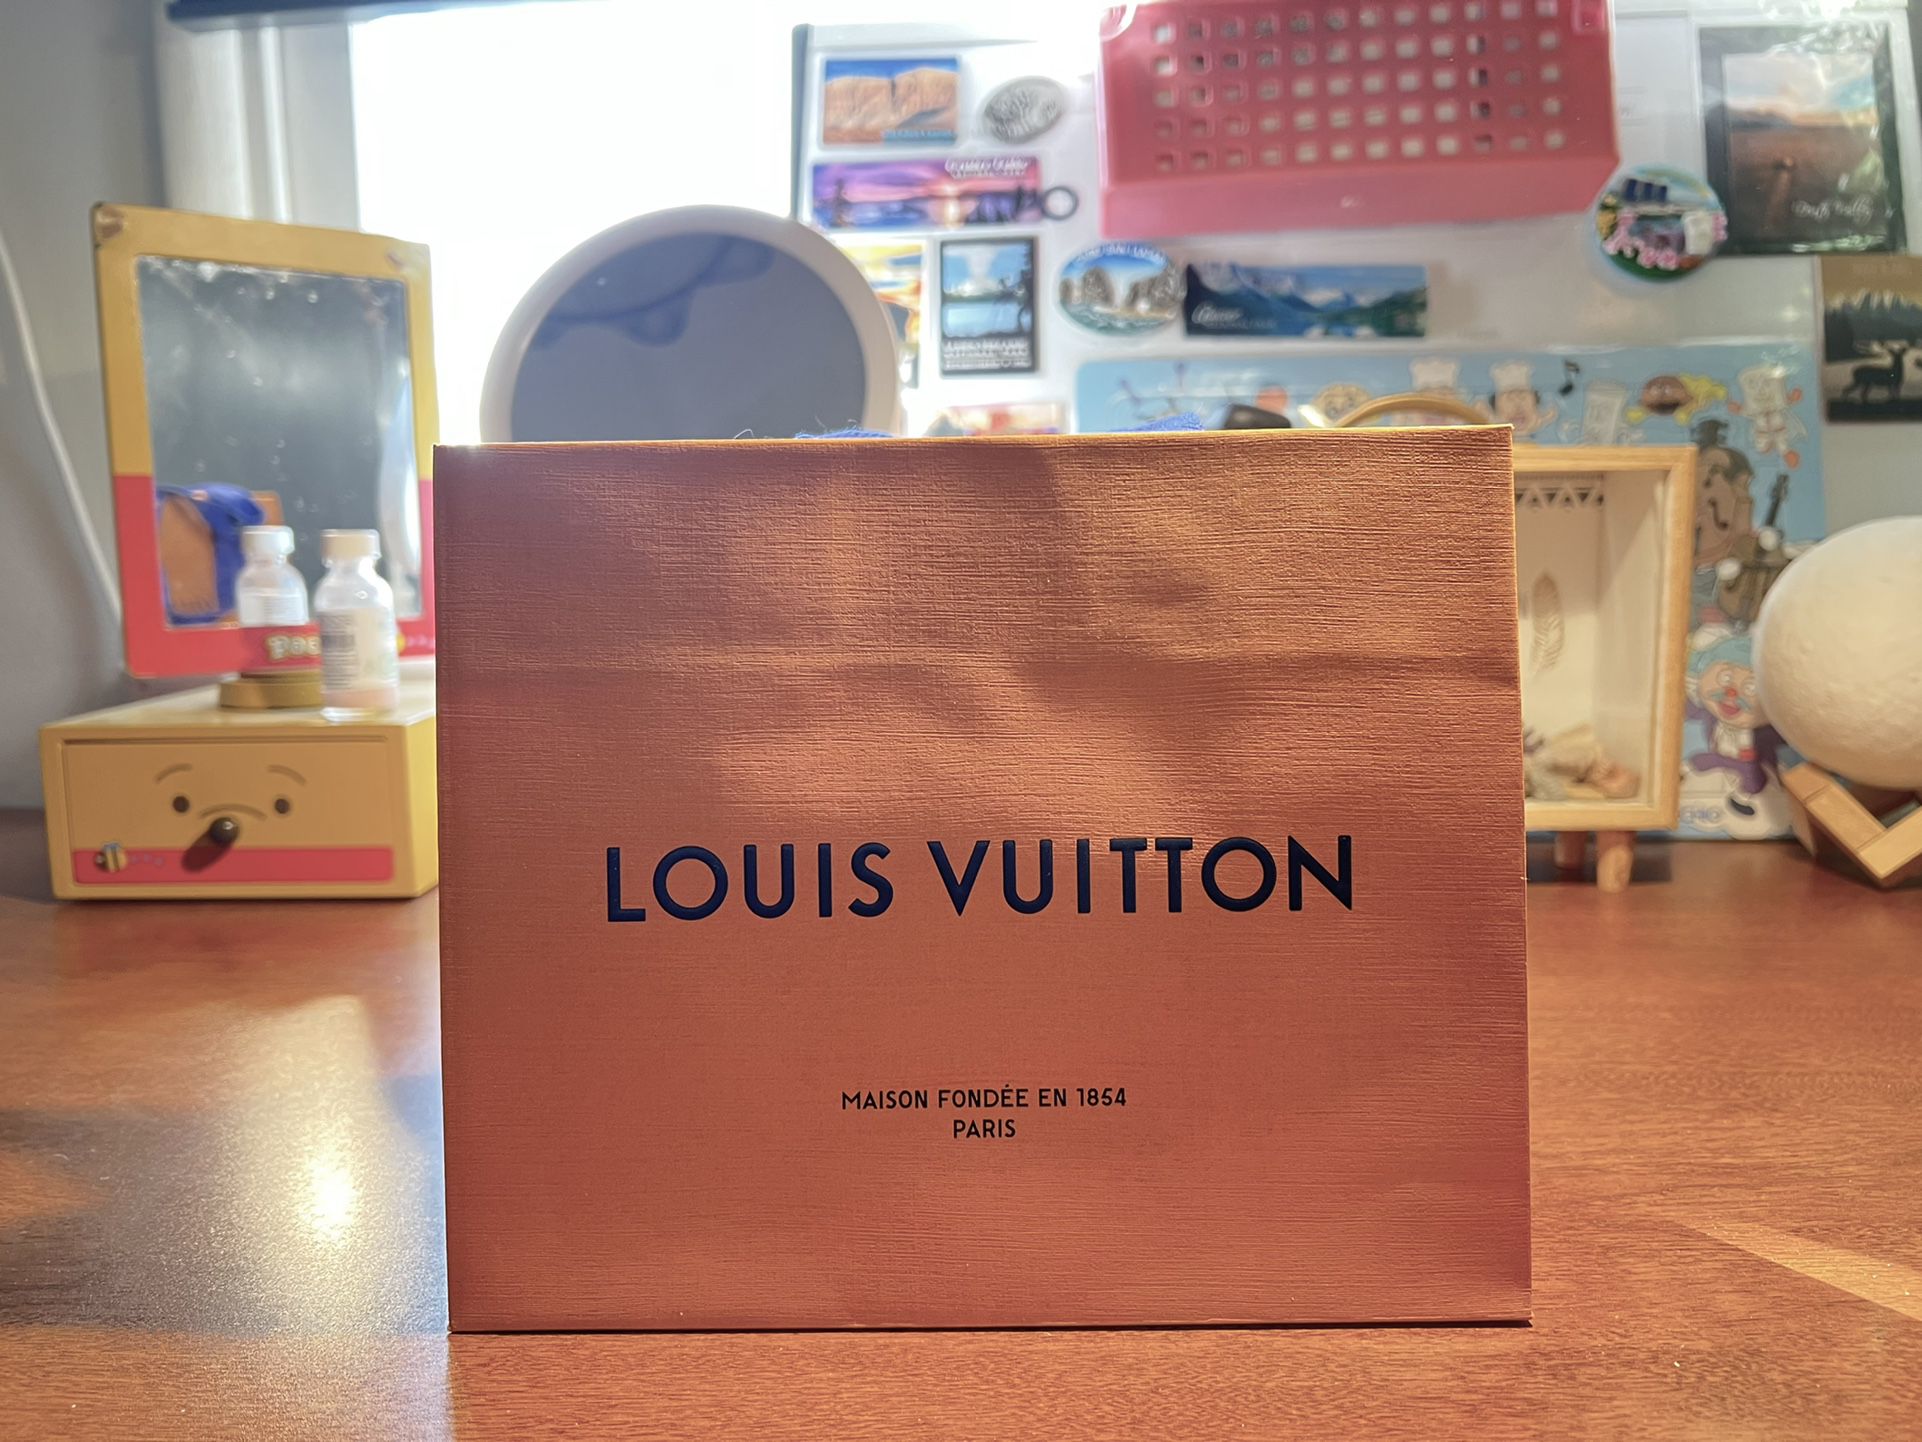 Louis Vuitton Kirigami Pouch Bag Charm and Key Holder for Sale in Santa  Rosa, CA - OfferUp